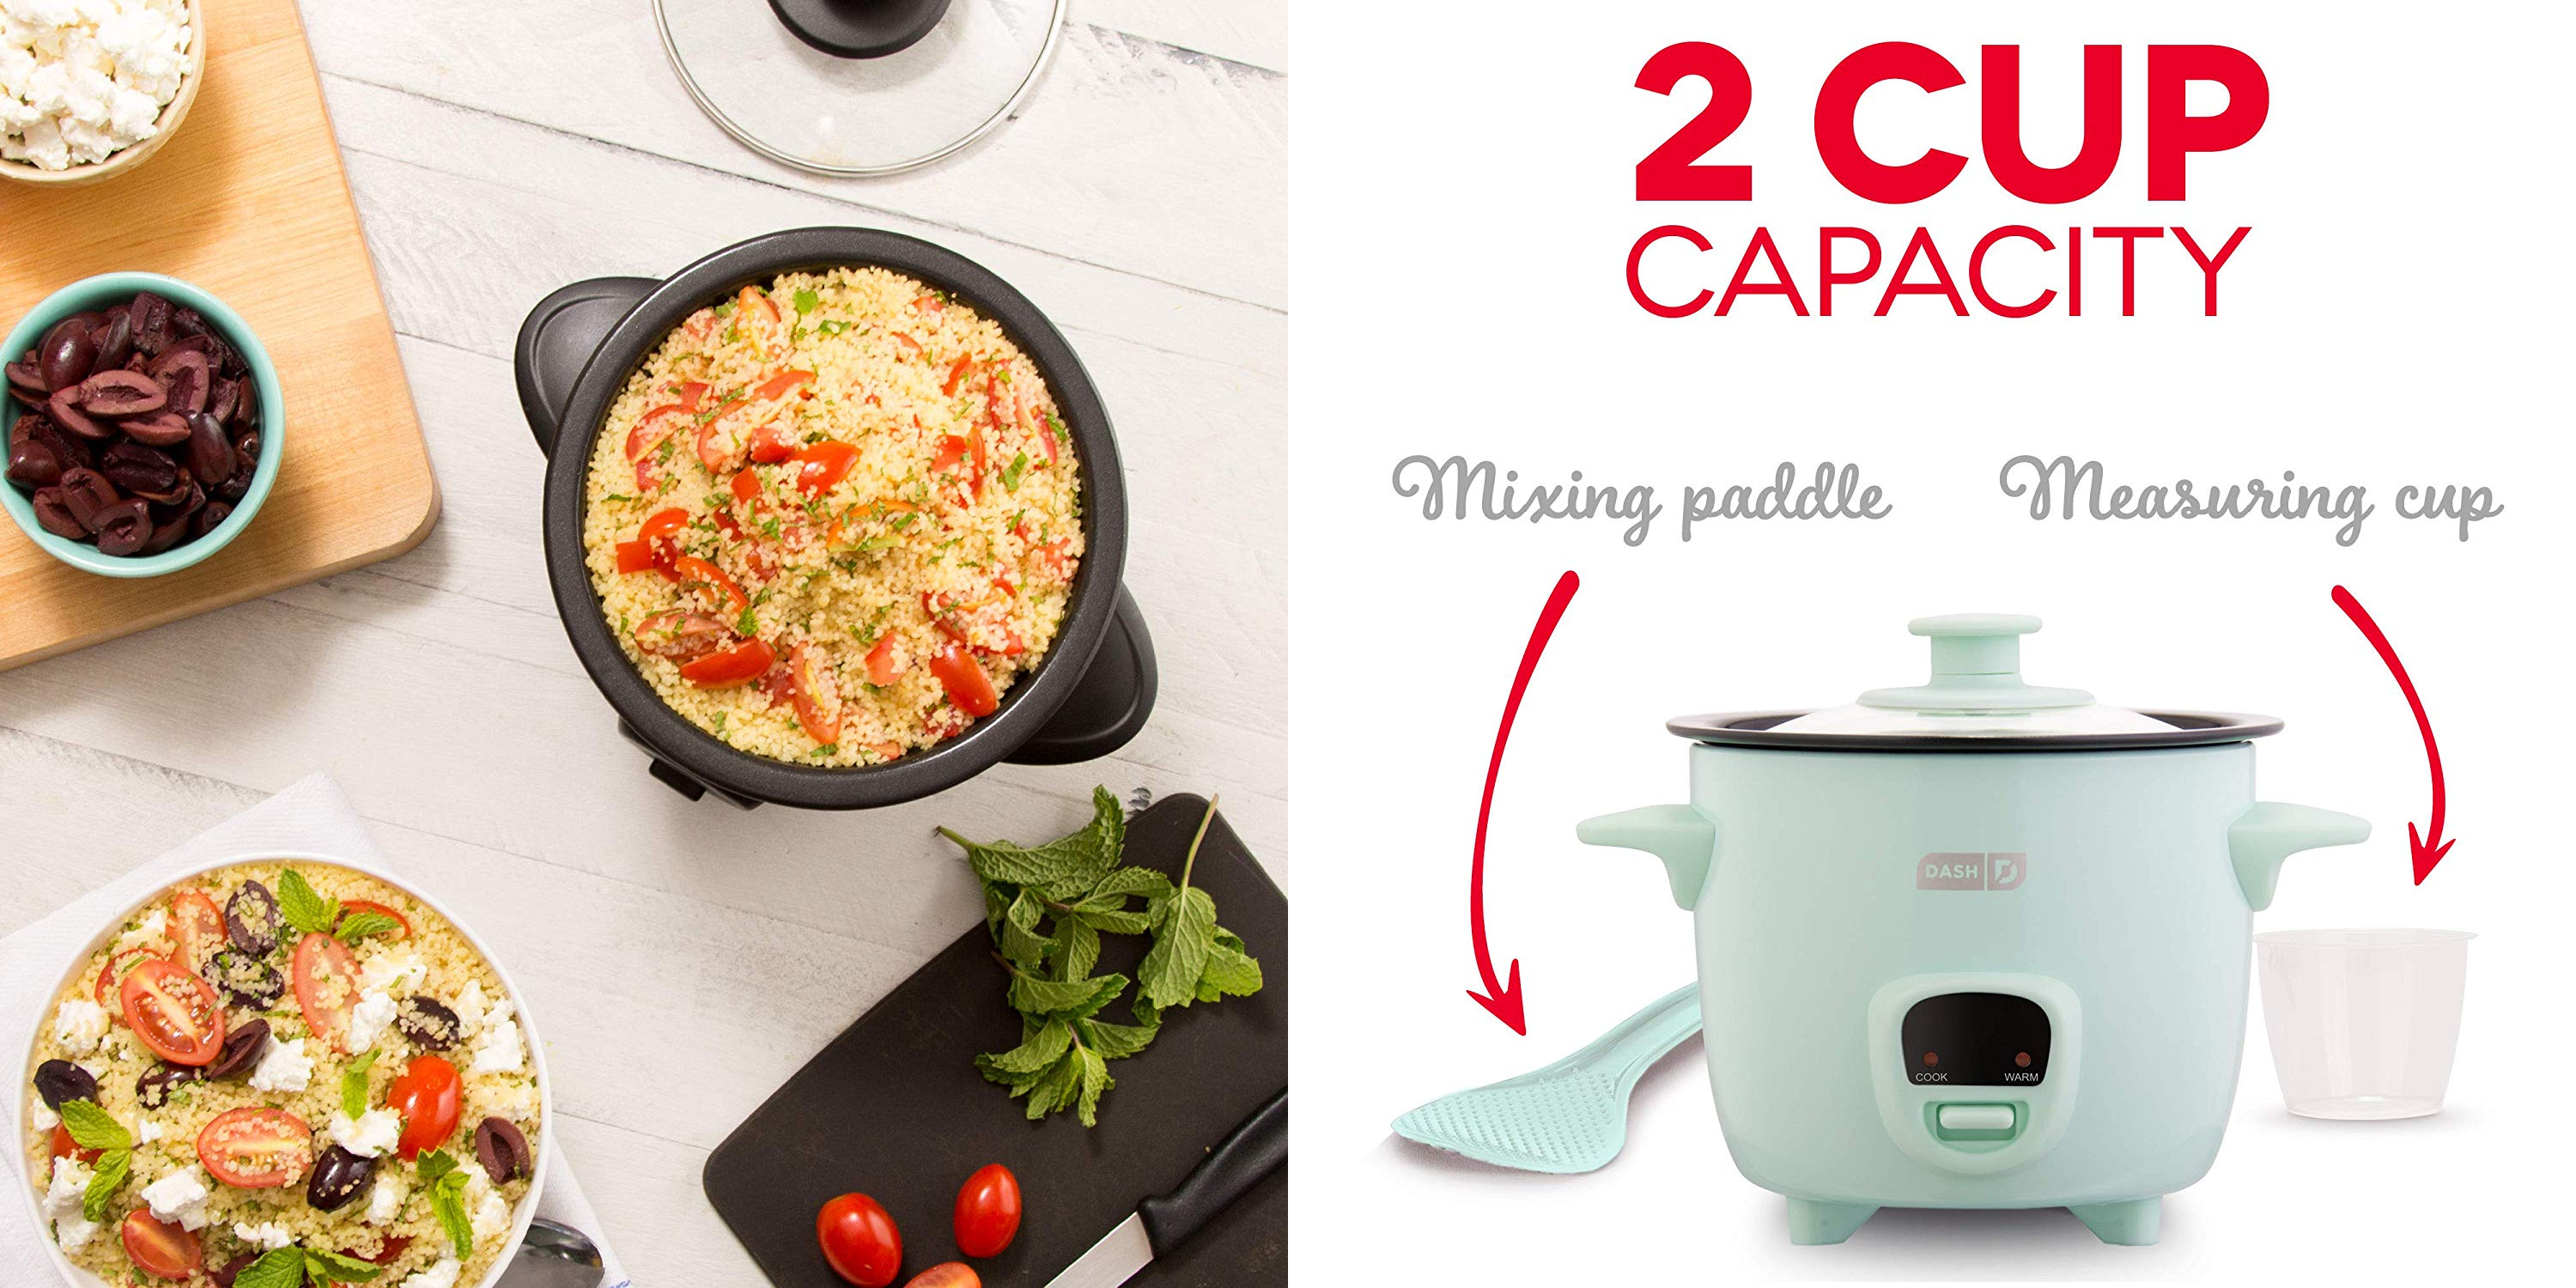 The Dash Mini Rice Cooker has a retro appeal & a low price of $17